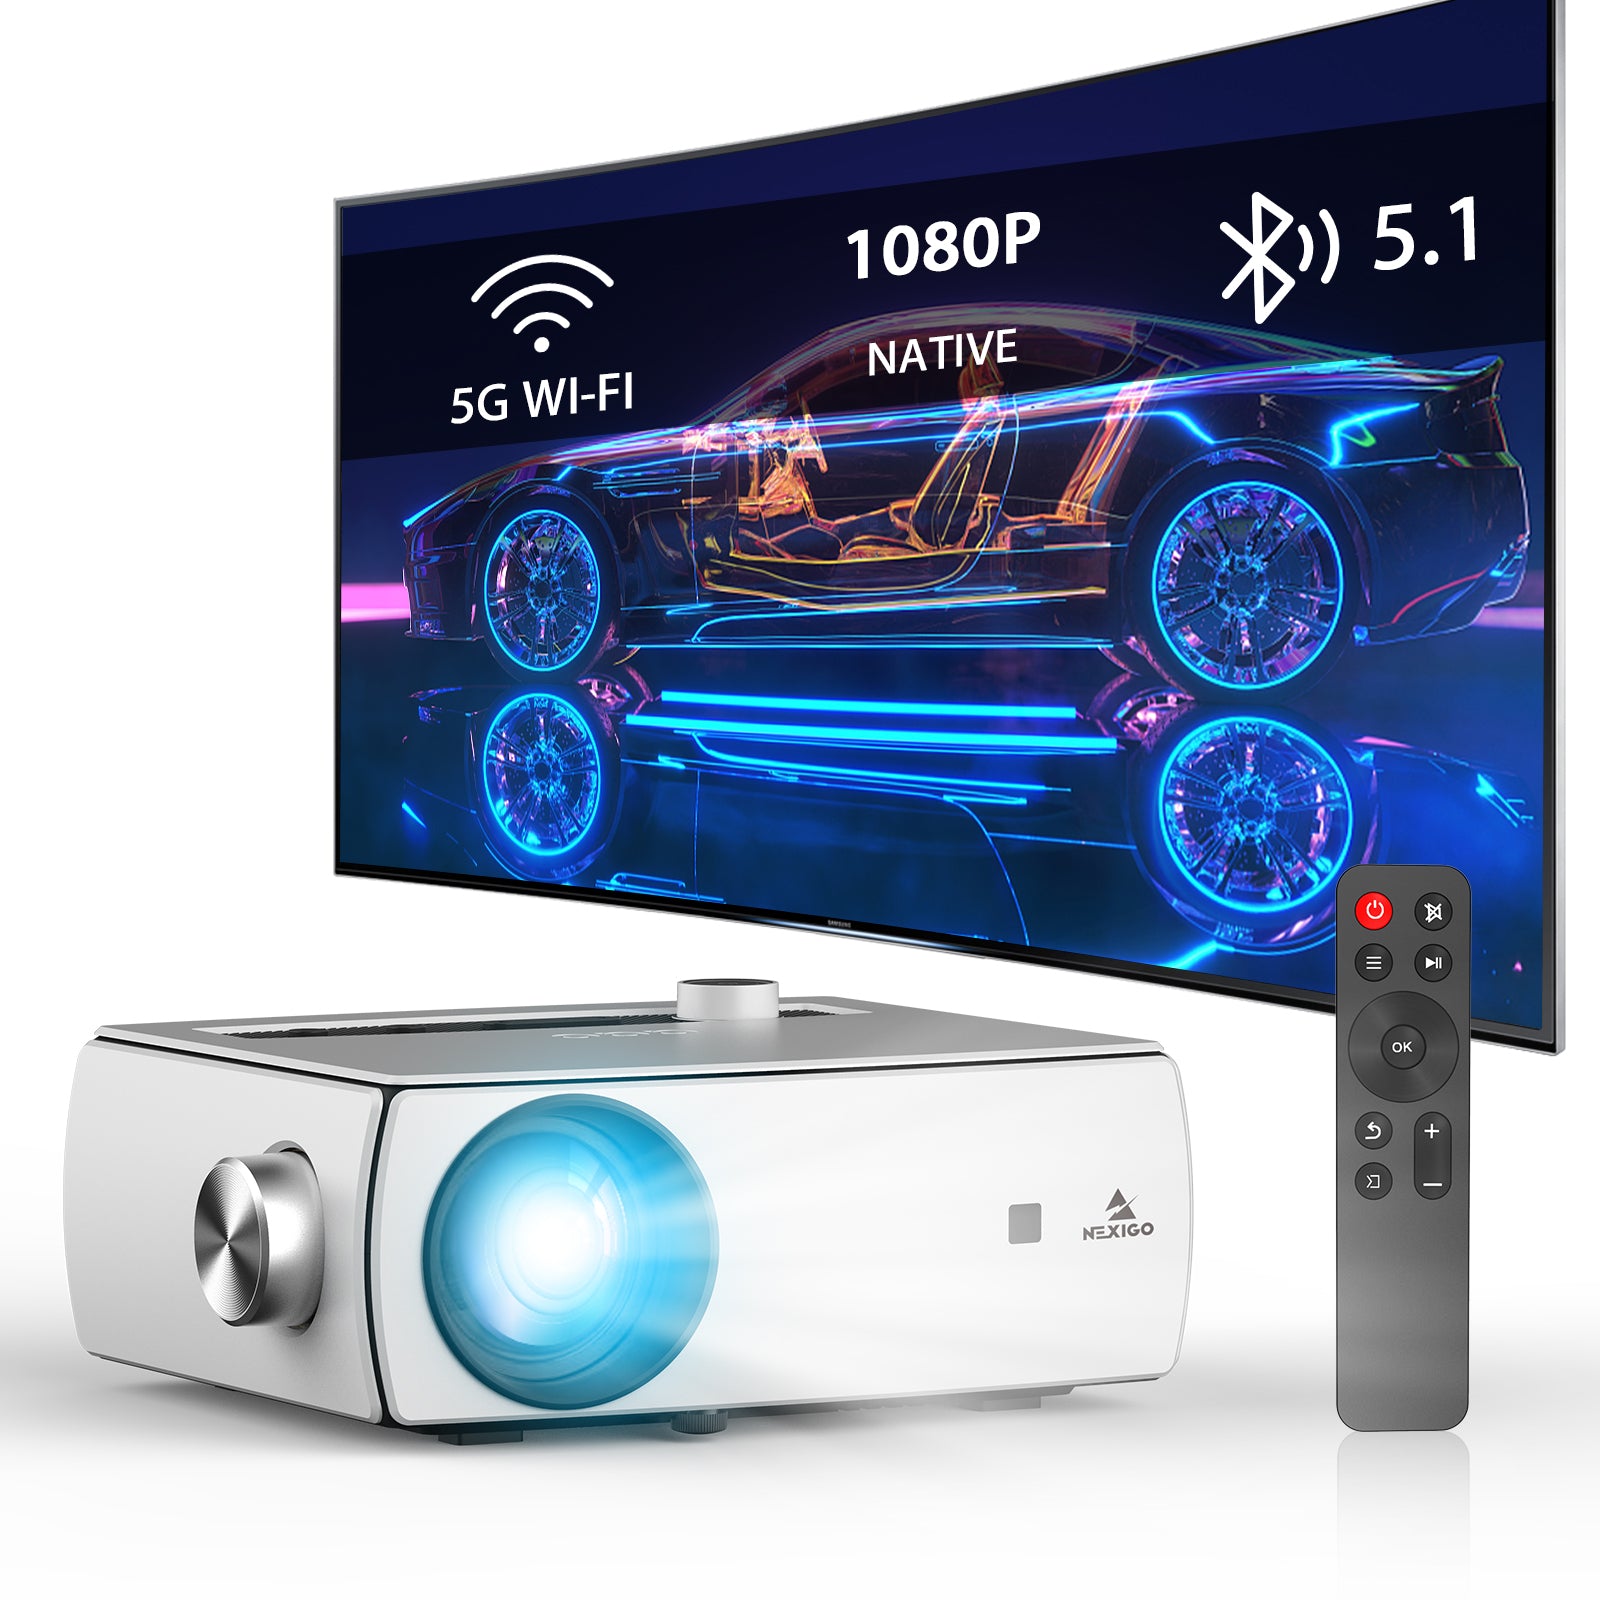 NexiGo PJ10 is a native 1080p HD projector with immersive 5G Wi-Fi and Bluetooth 5.1 wireless tech.